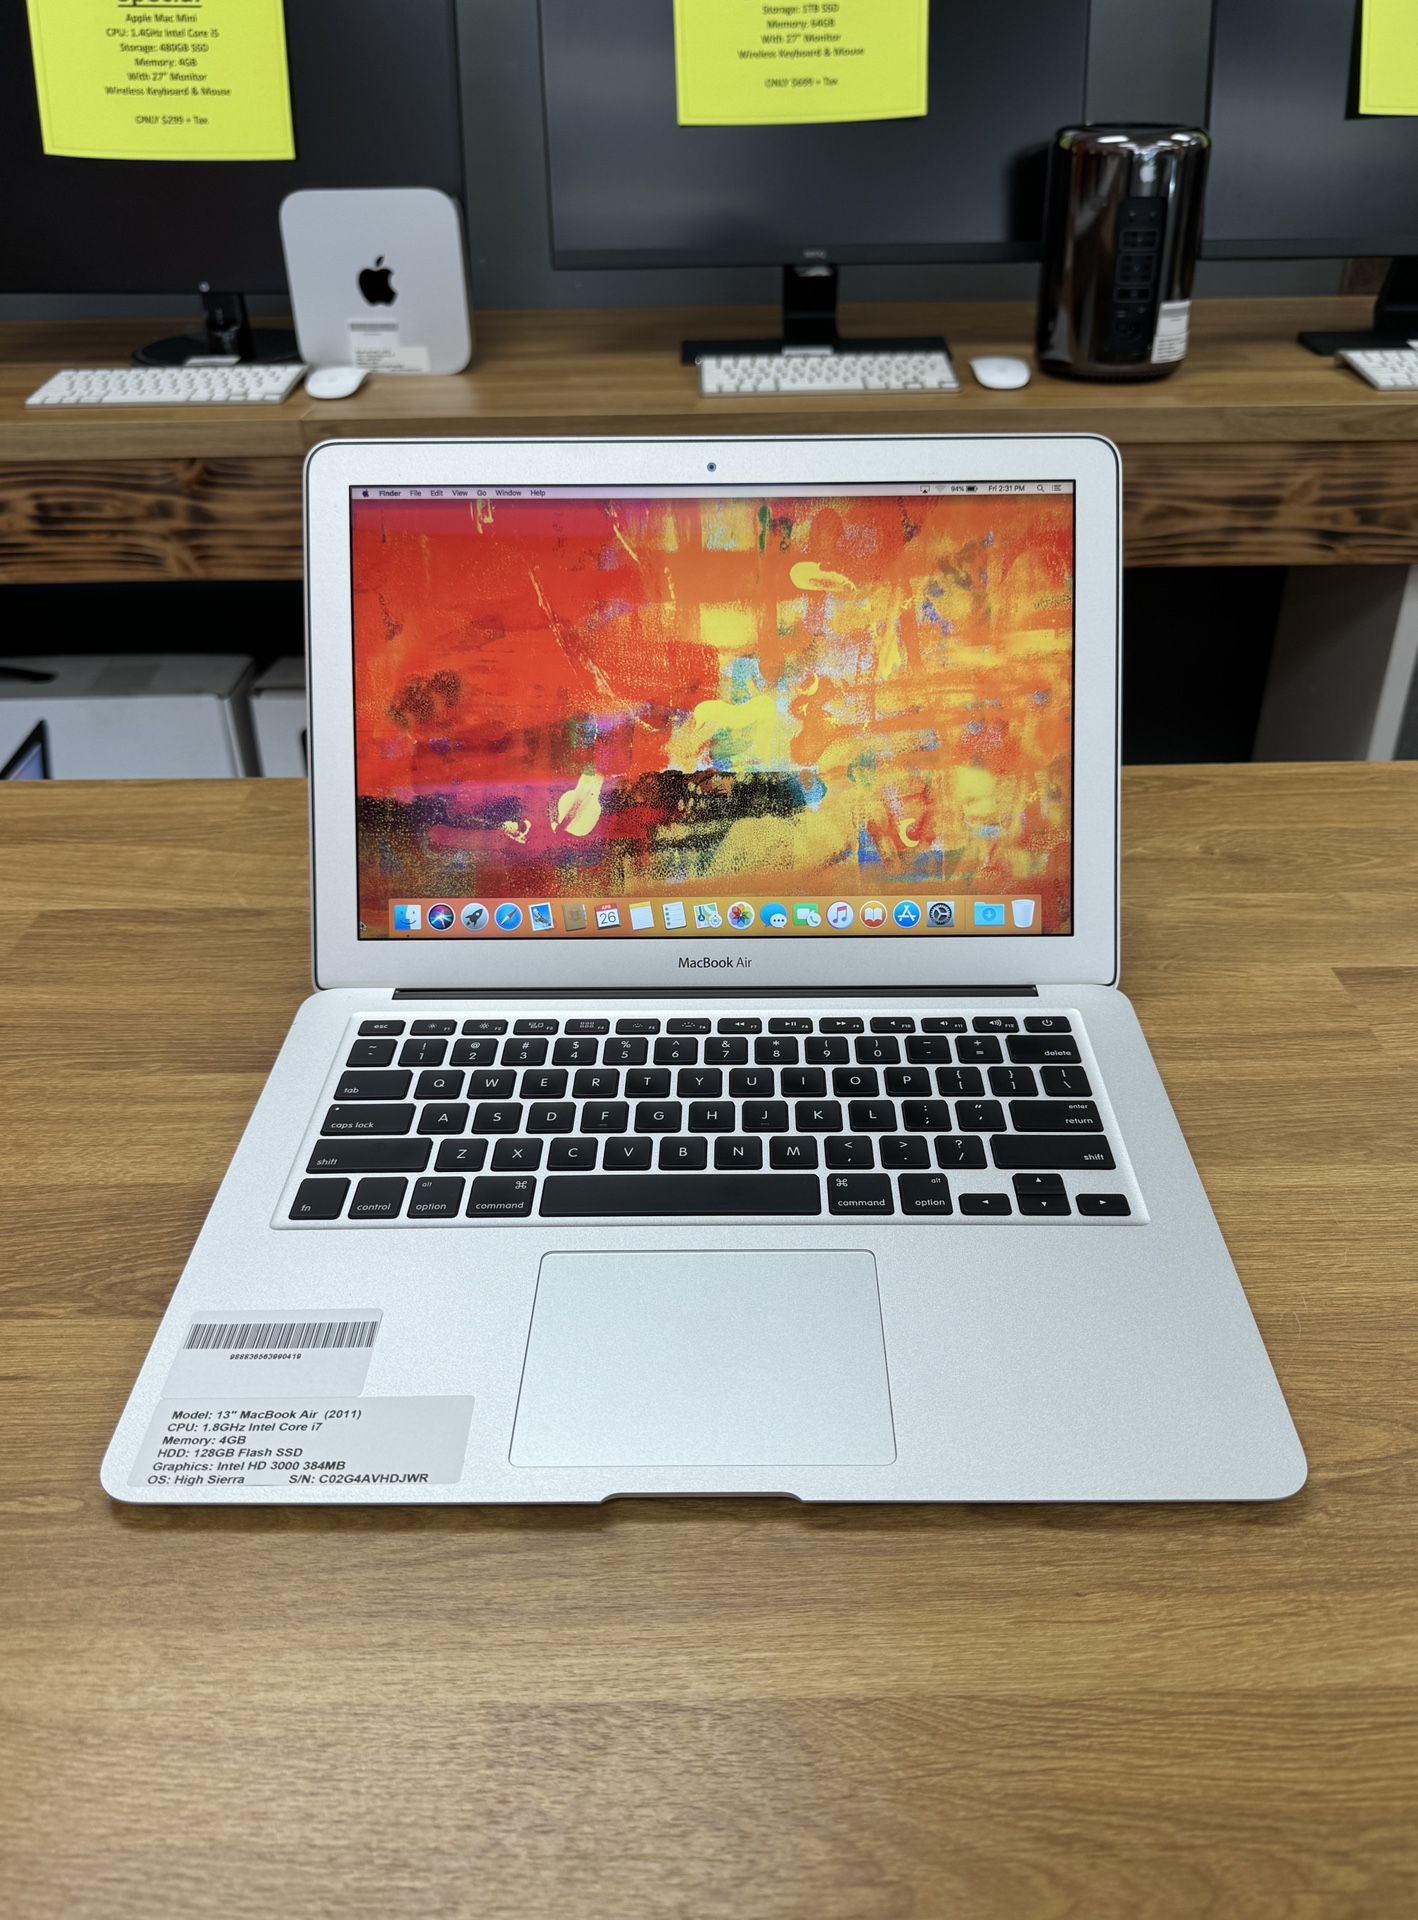 13" MacBook Air * 1.8Ghz Intel Core i7 * 128GB SSD * 4GB RAM * Excellent Condition 